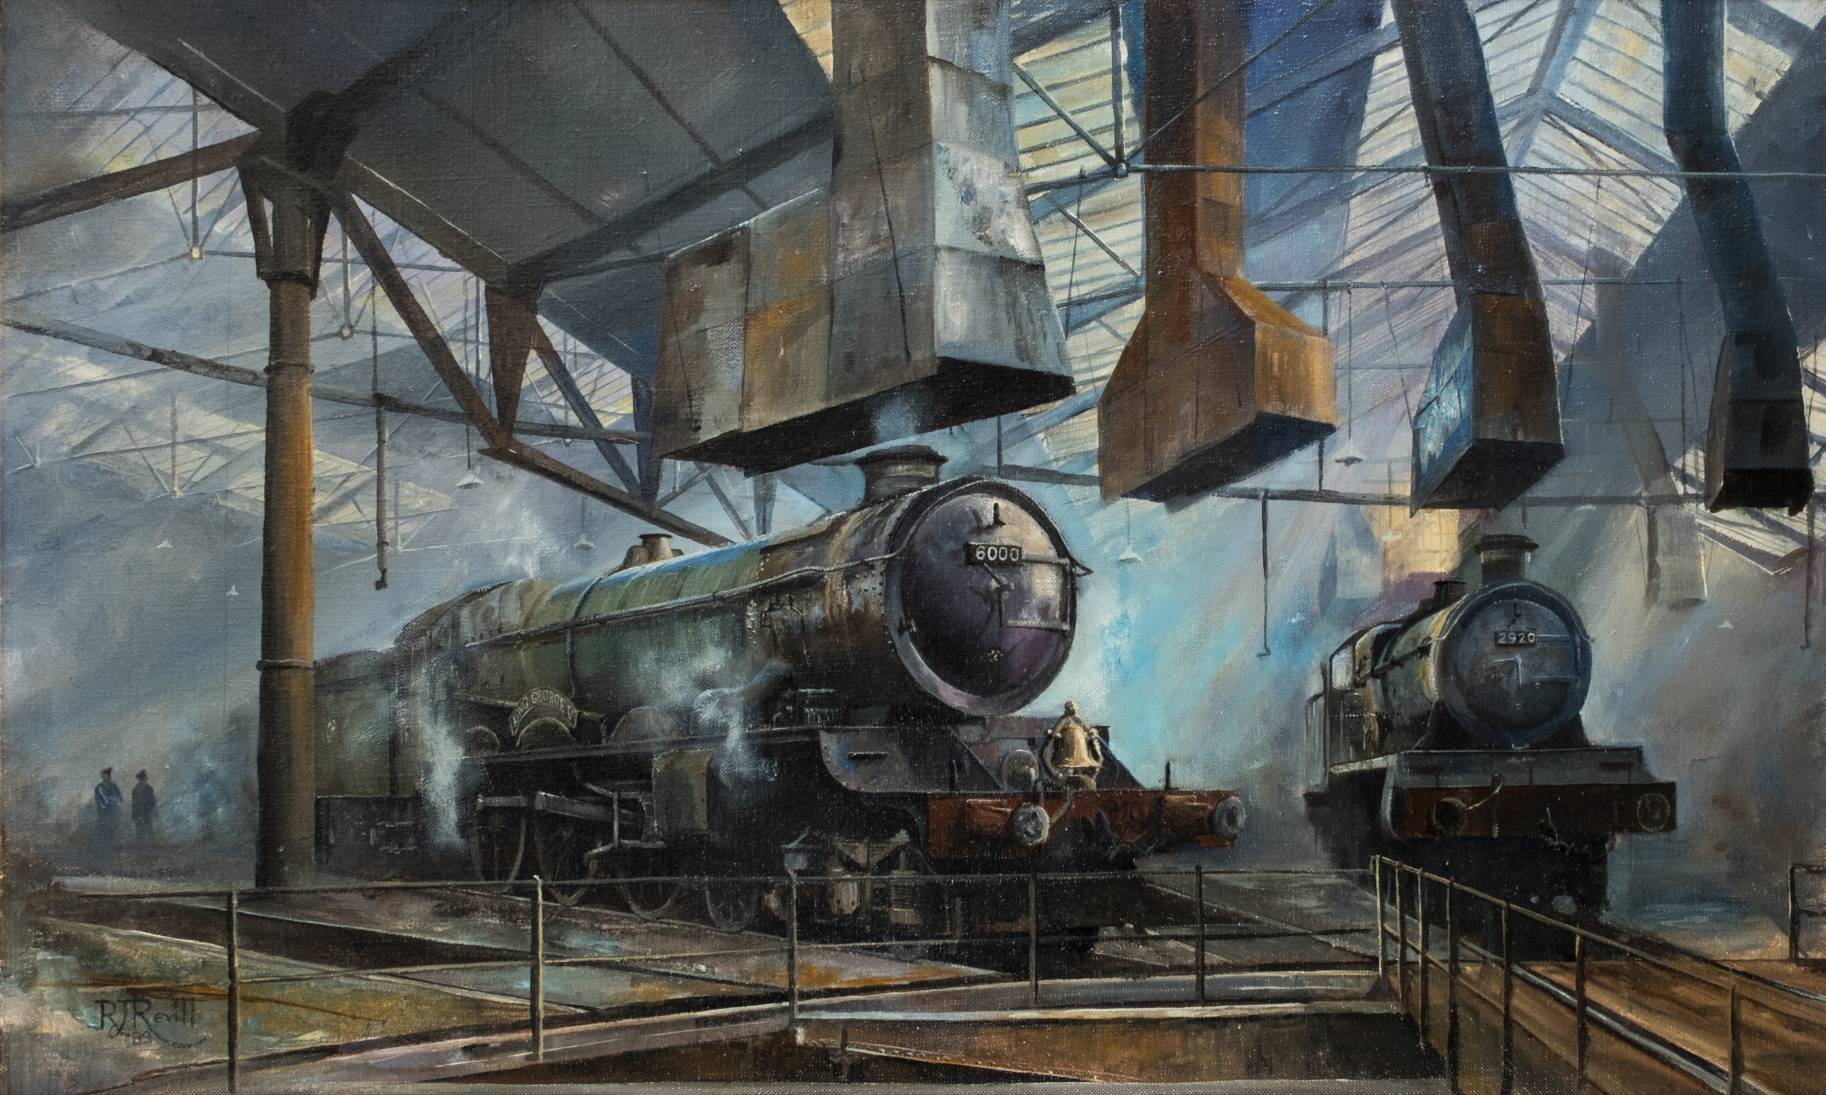 *Revill (R.J.). George V in the sheds at Swindon, oil on canvas, signed and dated 1989 lower left,